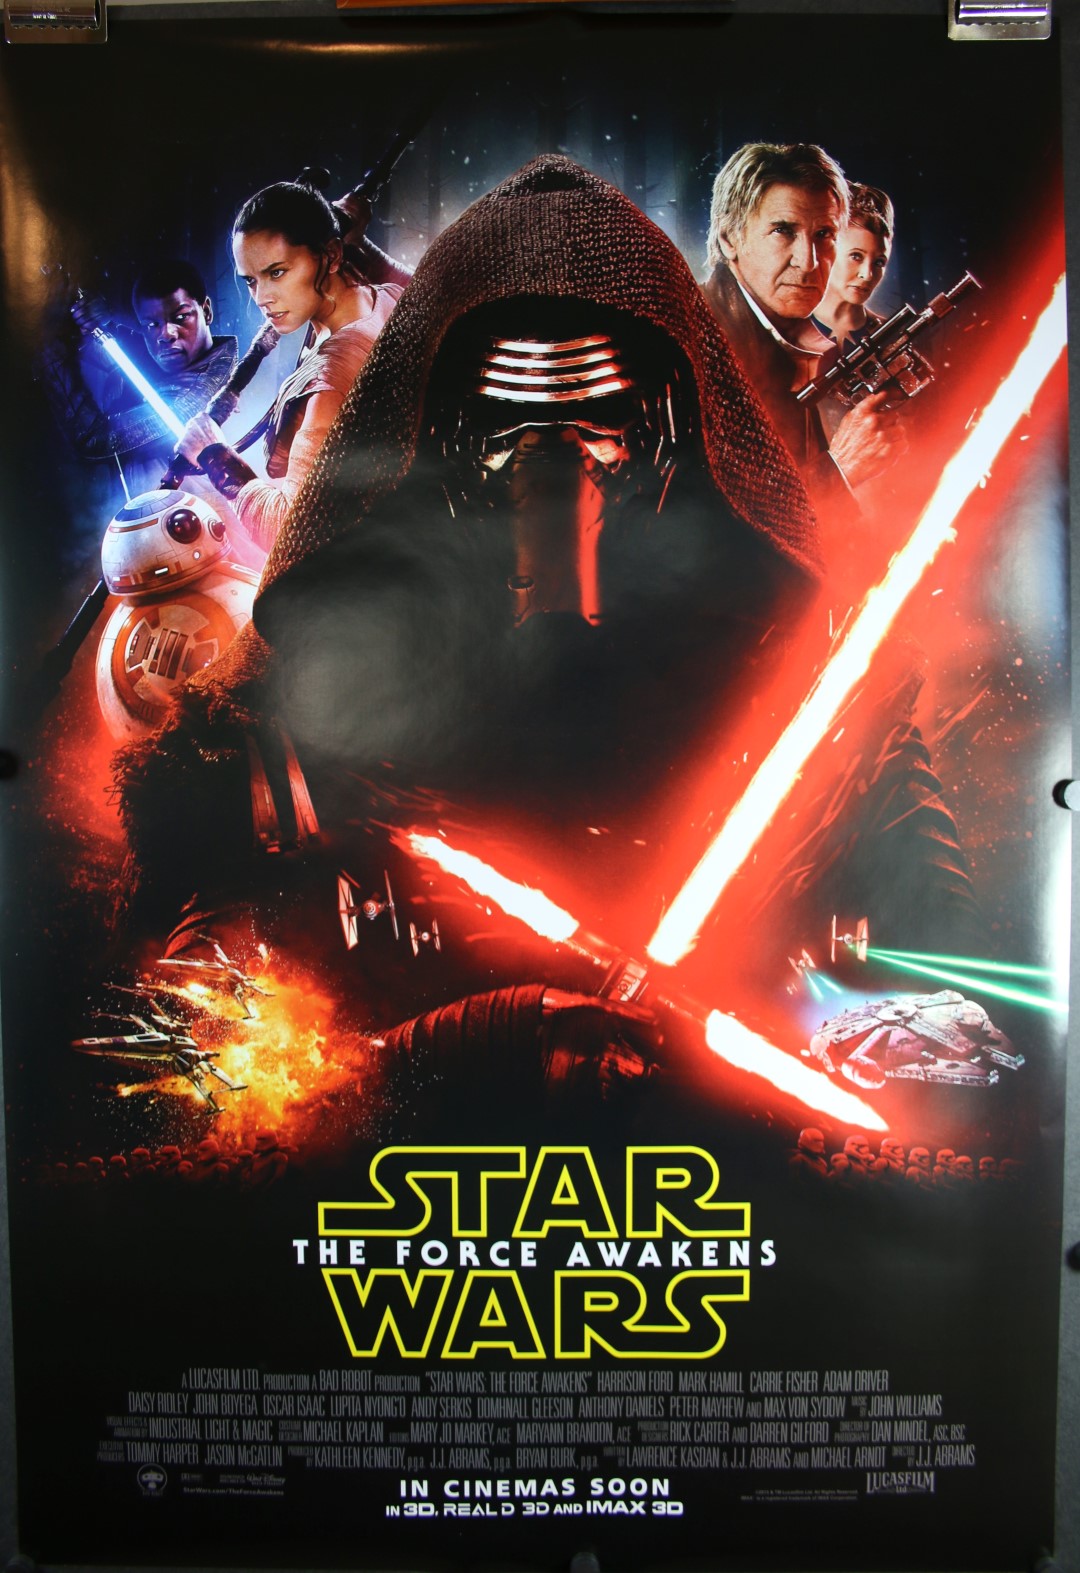 Star Wars Movie Posters For Sale - peterazx